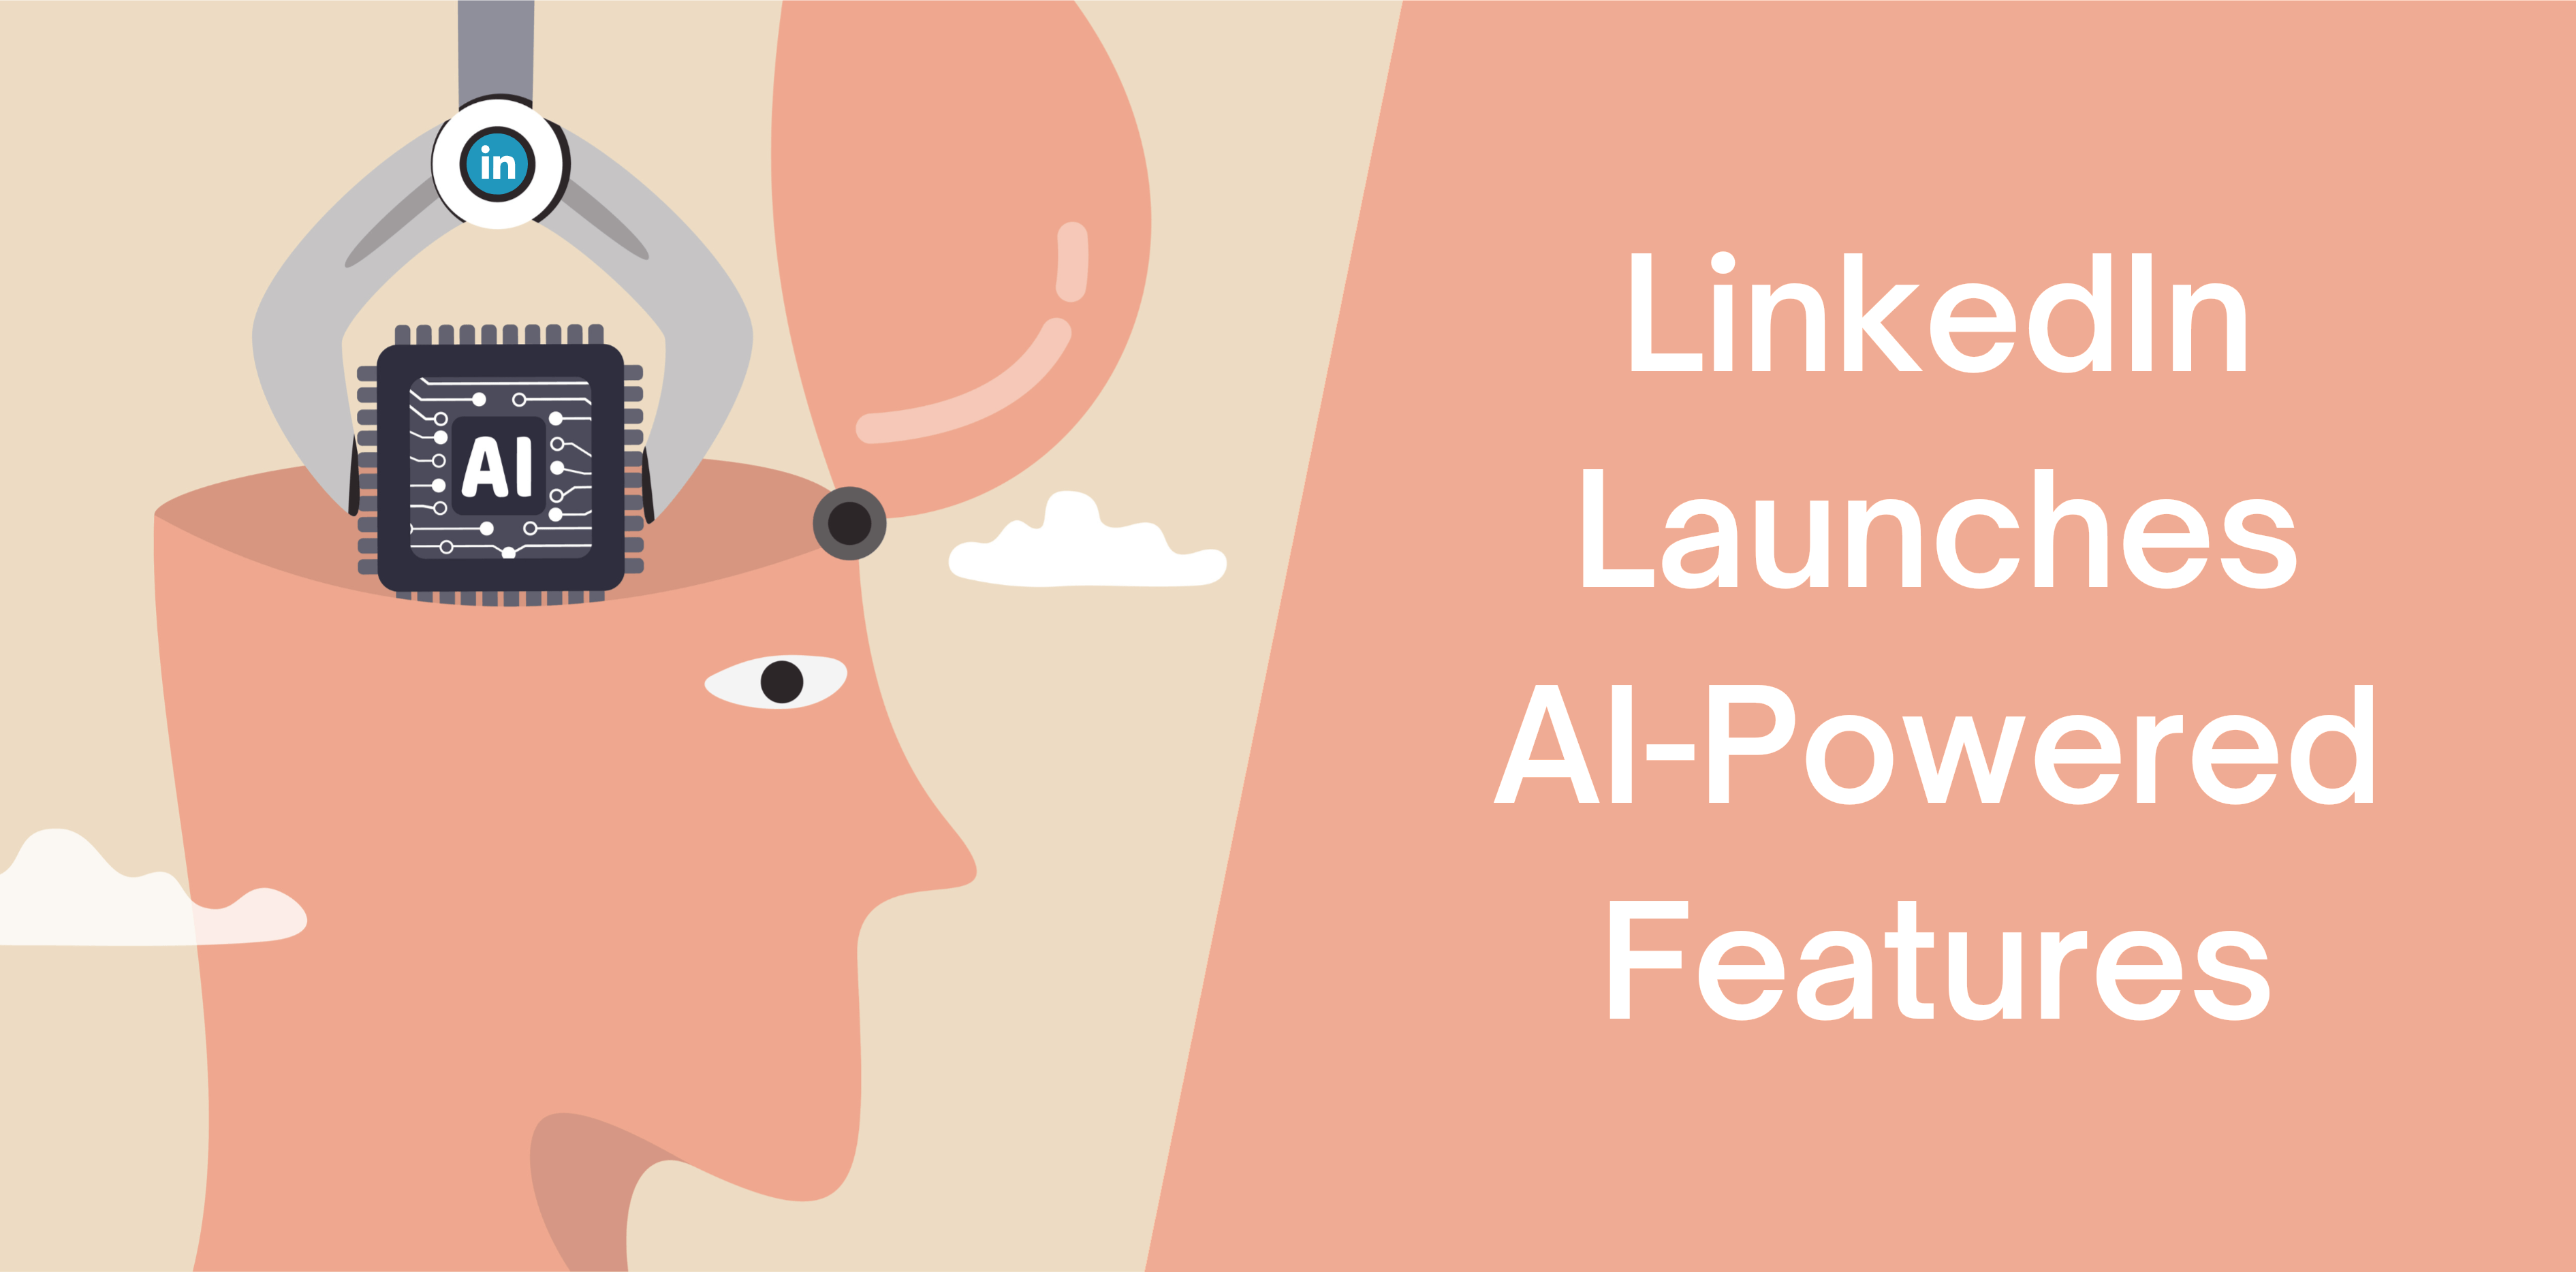 Thumbnail-LinkedIn-Launches-AI-Powered-Features